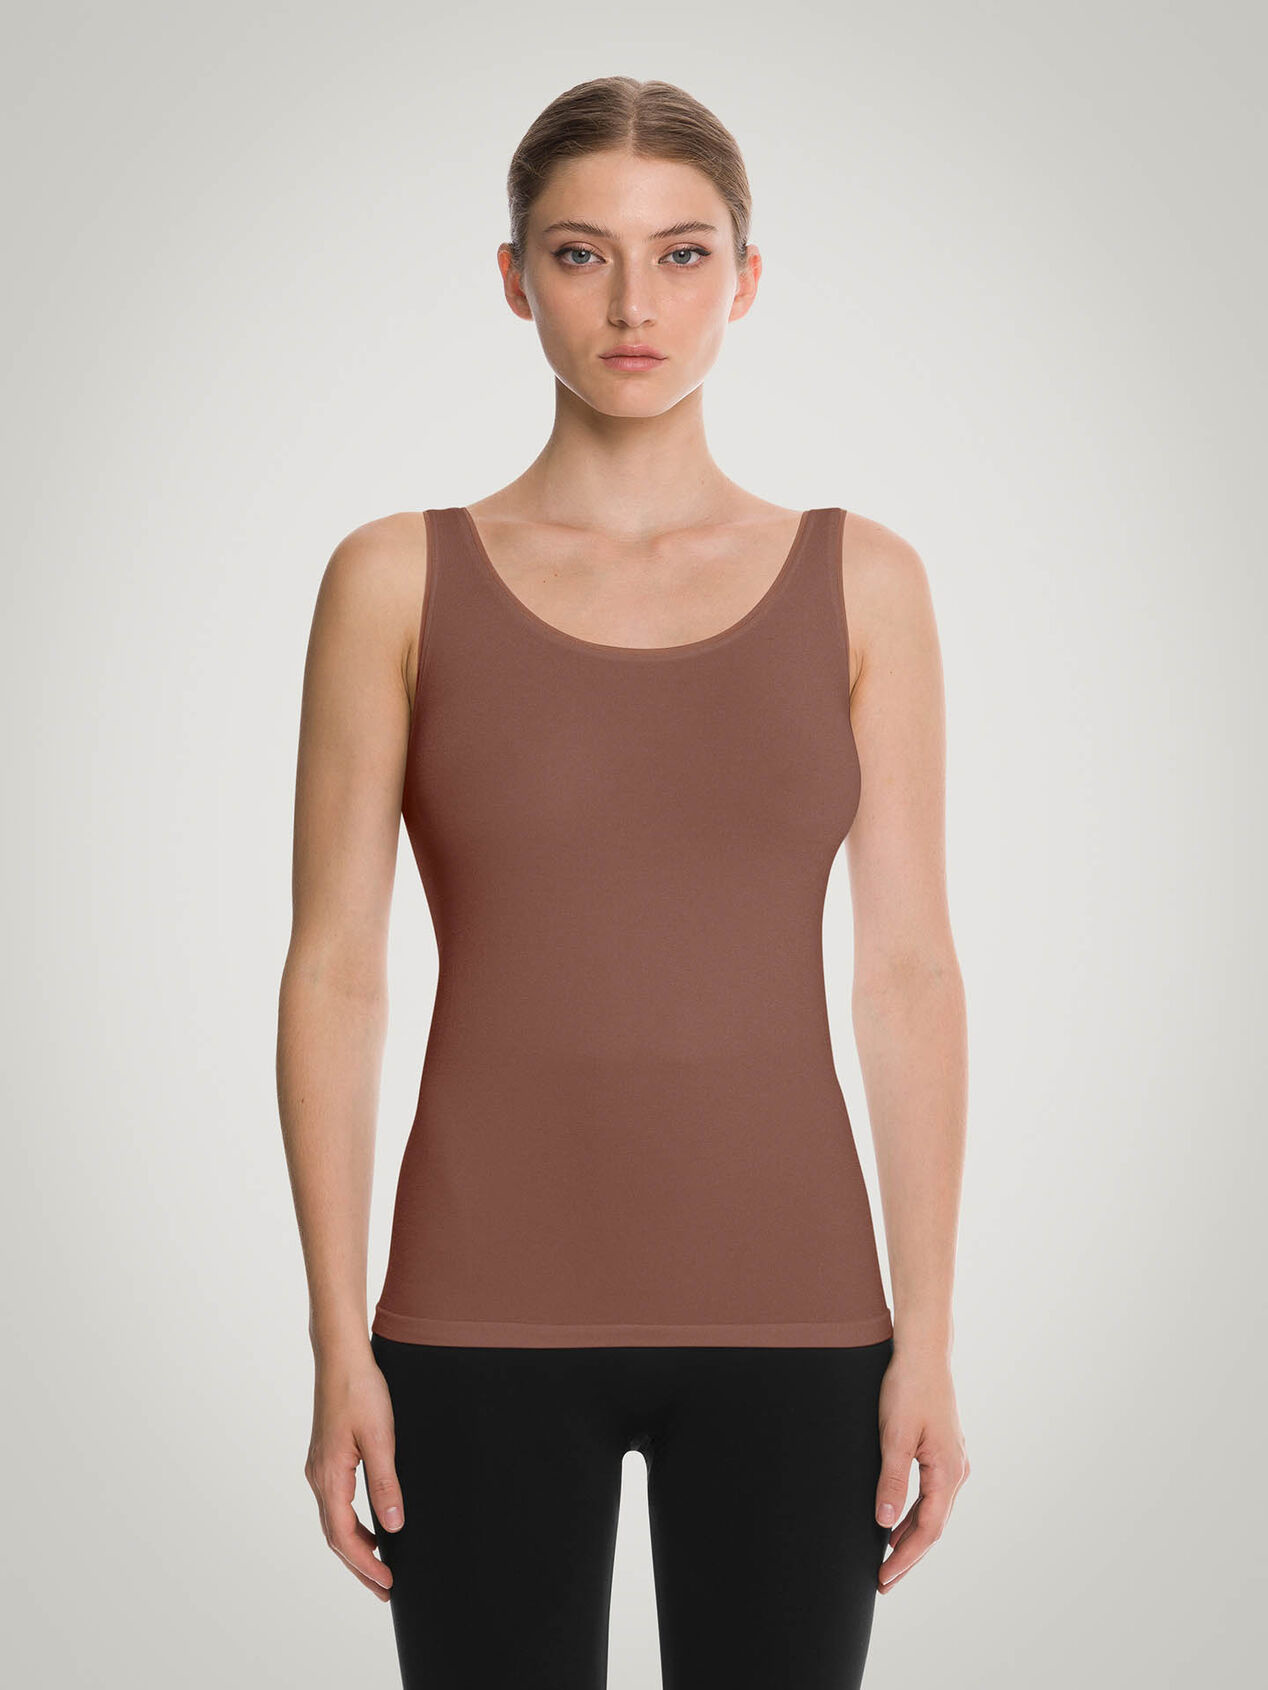 Tops & Tank tops Wolford - Buenos aires long sleeve top - 582987005